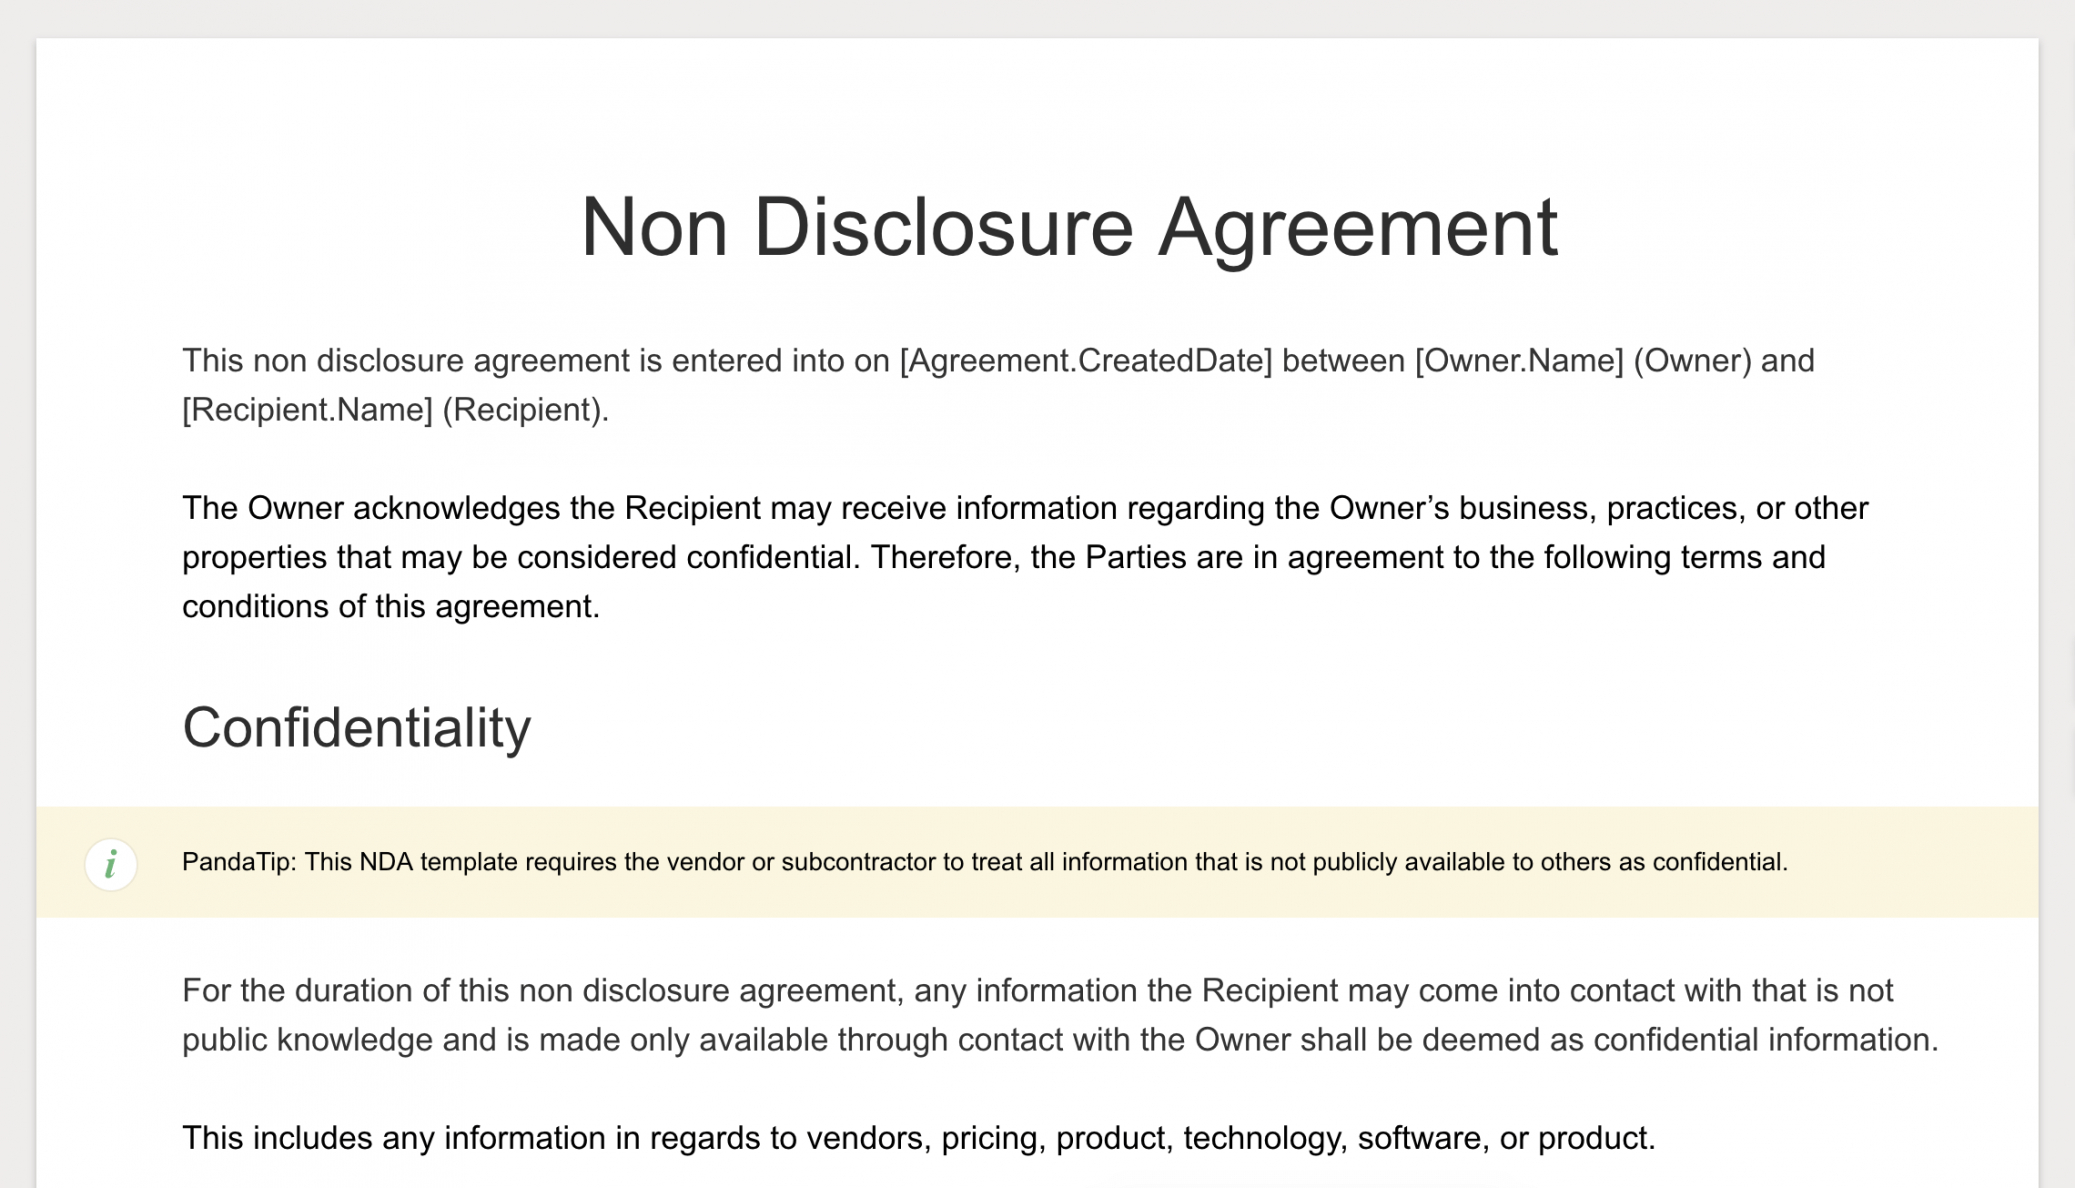 sample sign ndas with pandadoc how to sign short non disclosure agreement template pdf